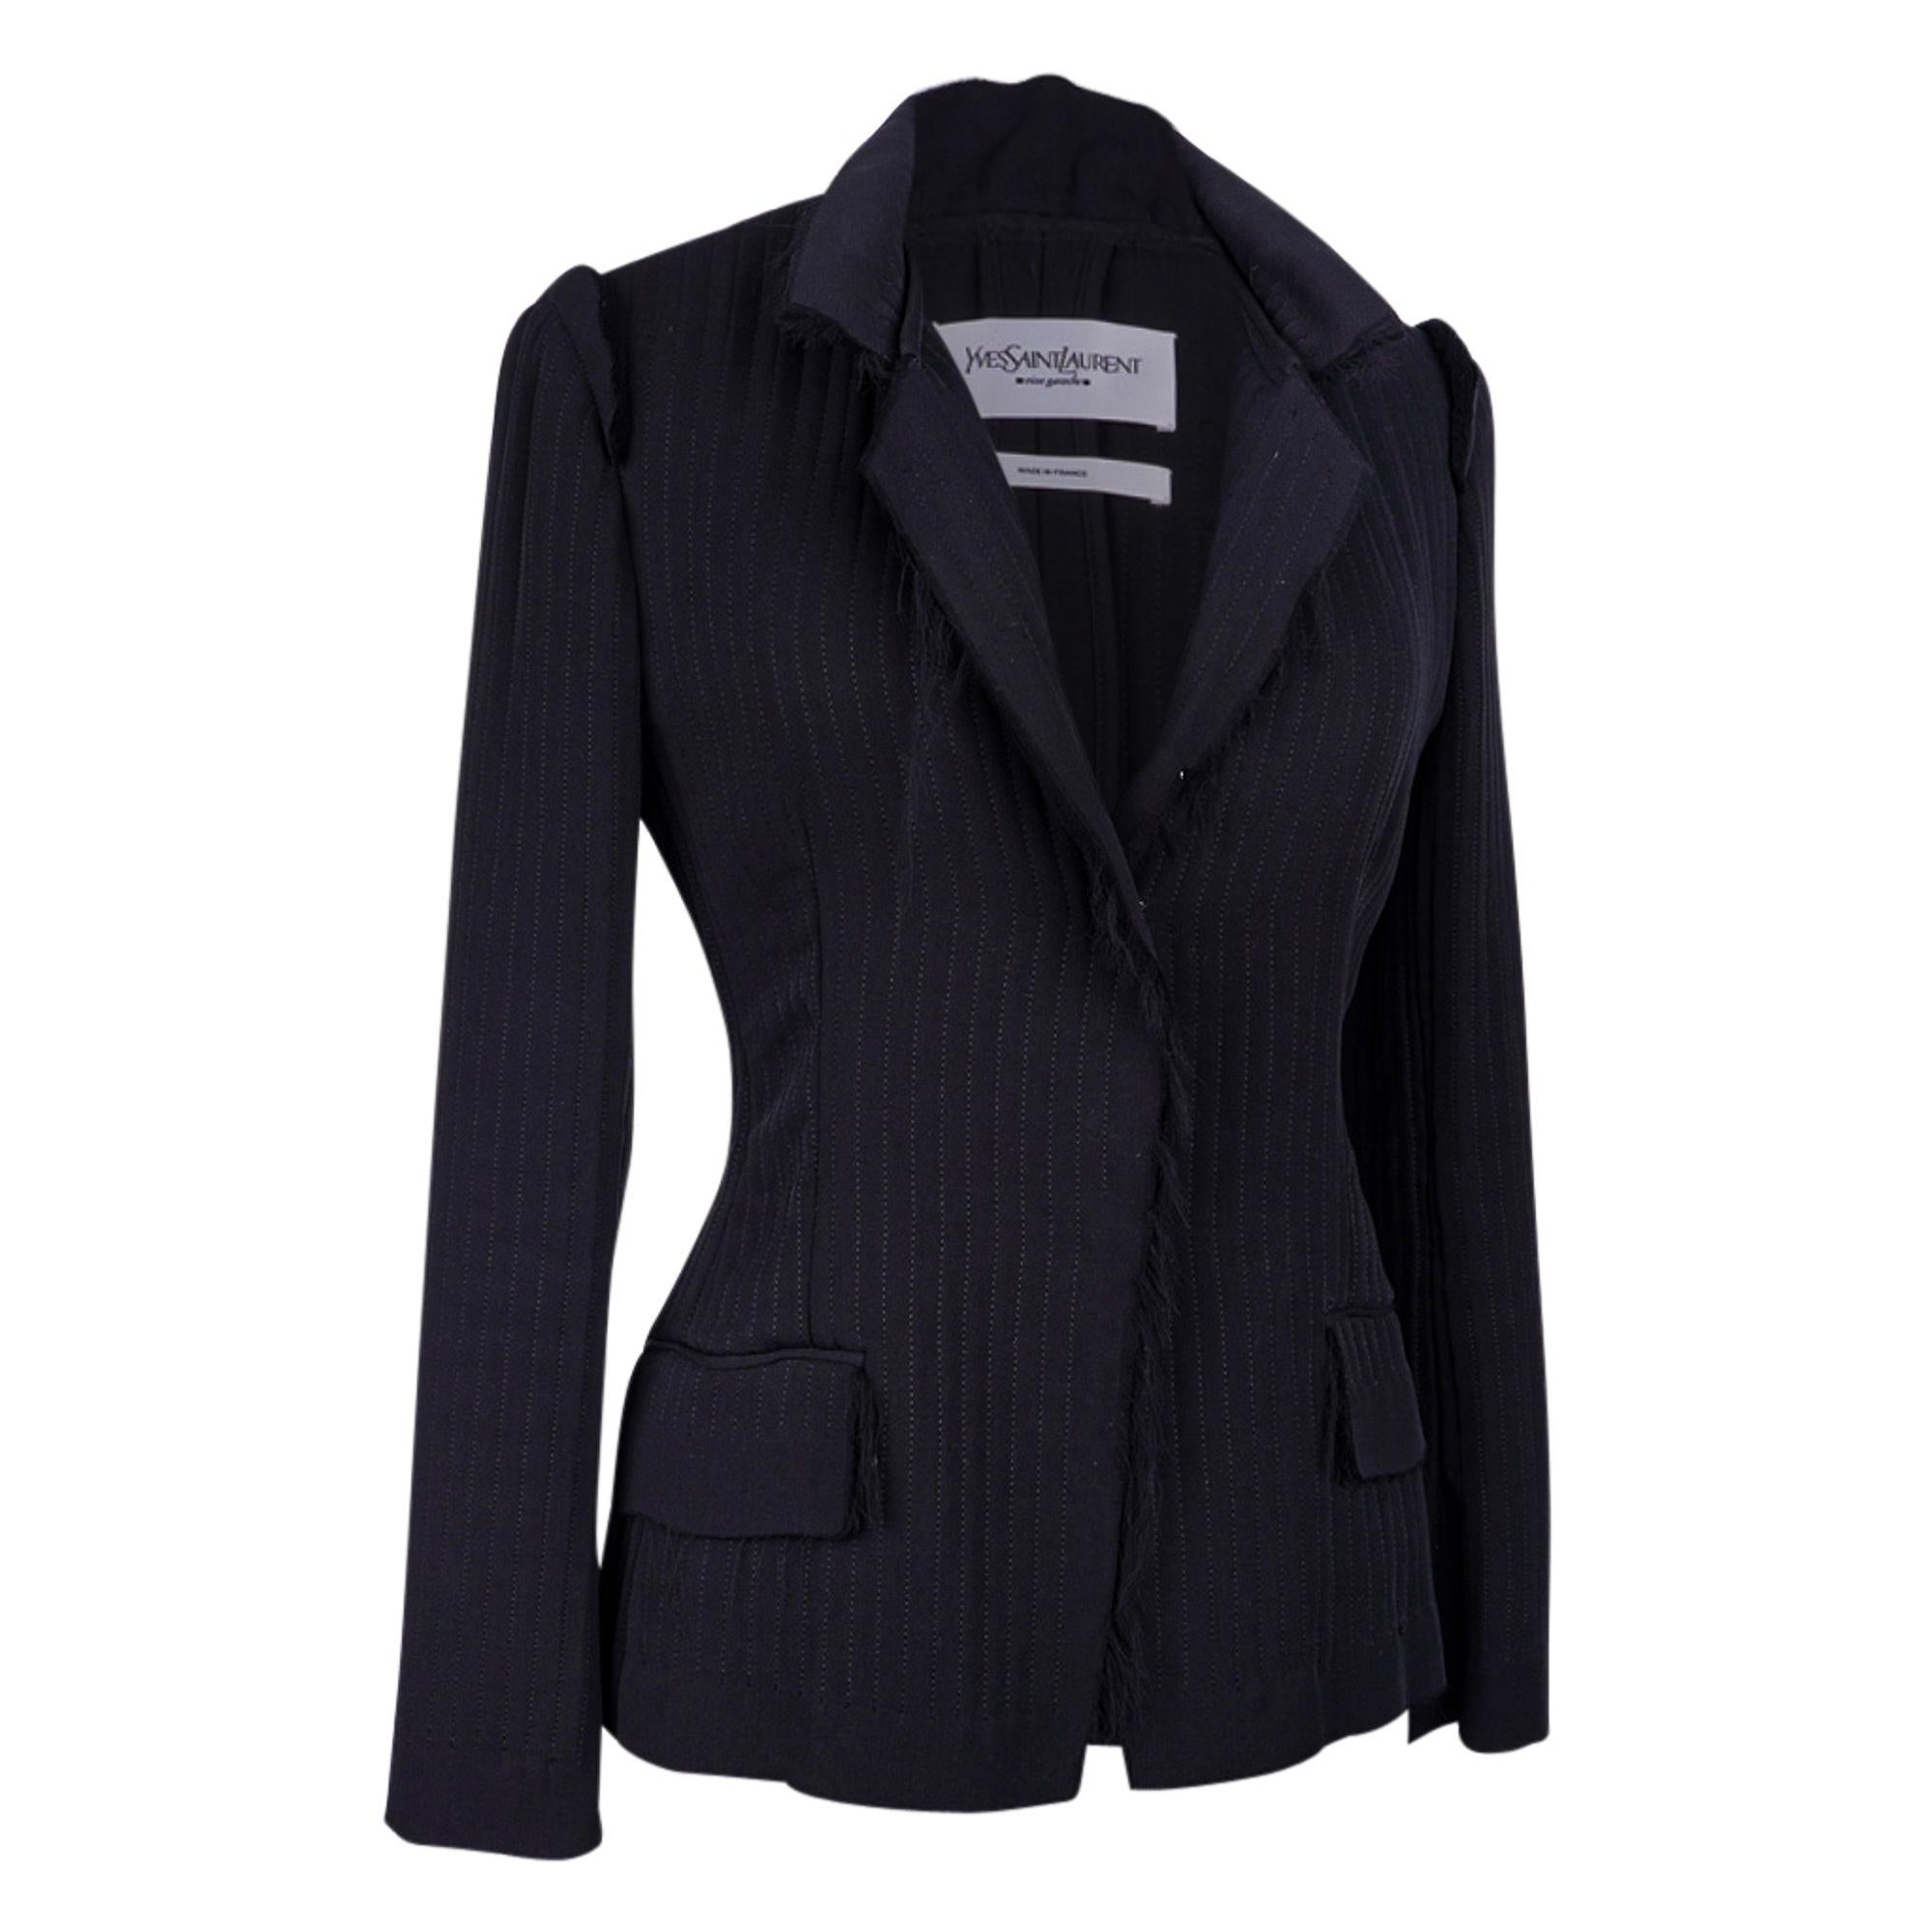 Women's Yves Saint Laurent Jacket Exquisite Tom Ford Creation in Layers 36